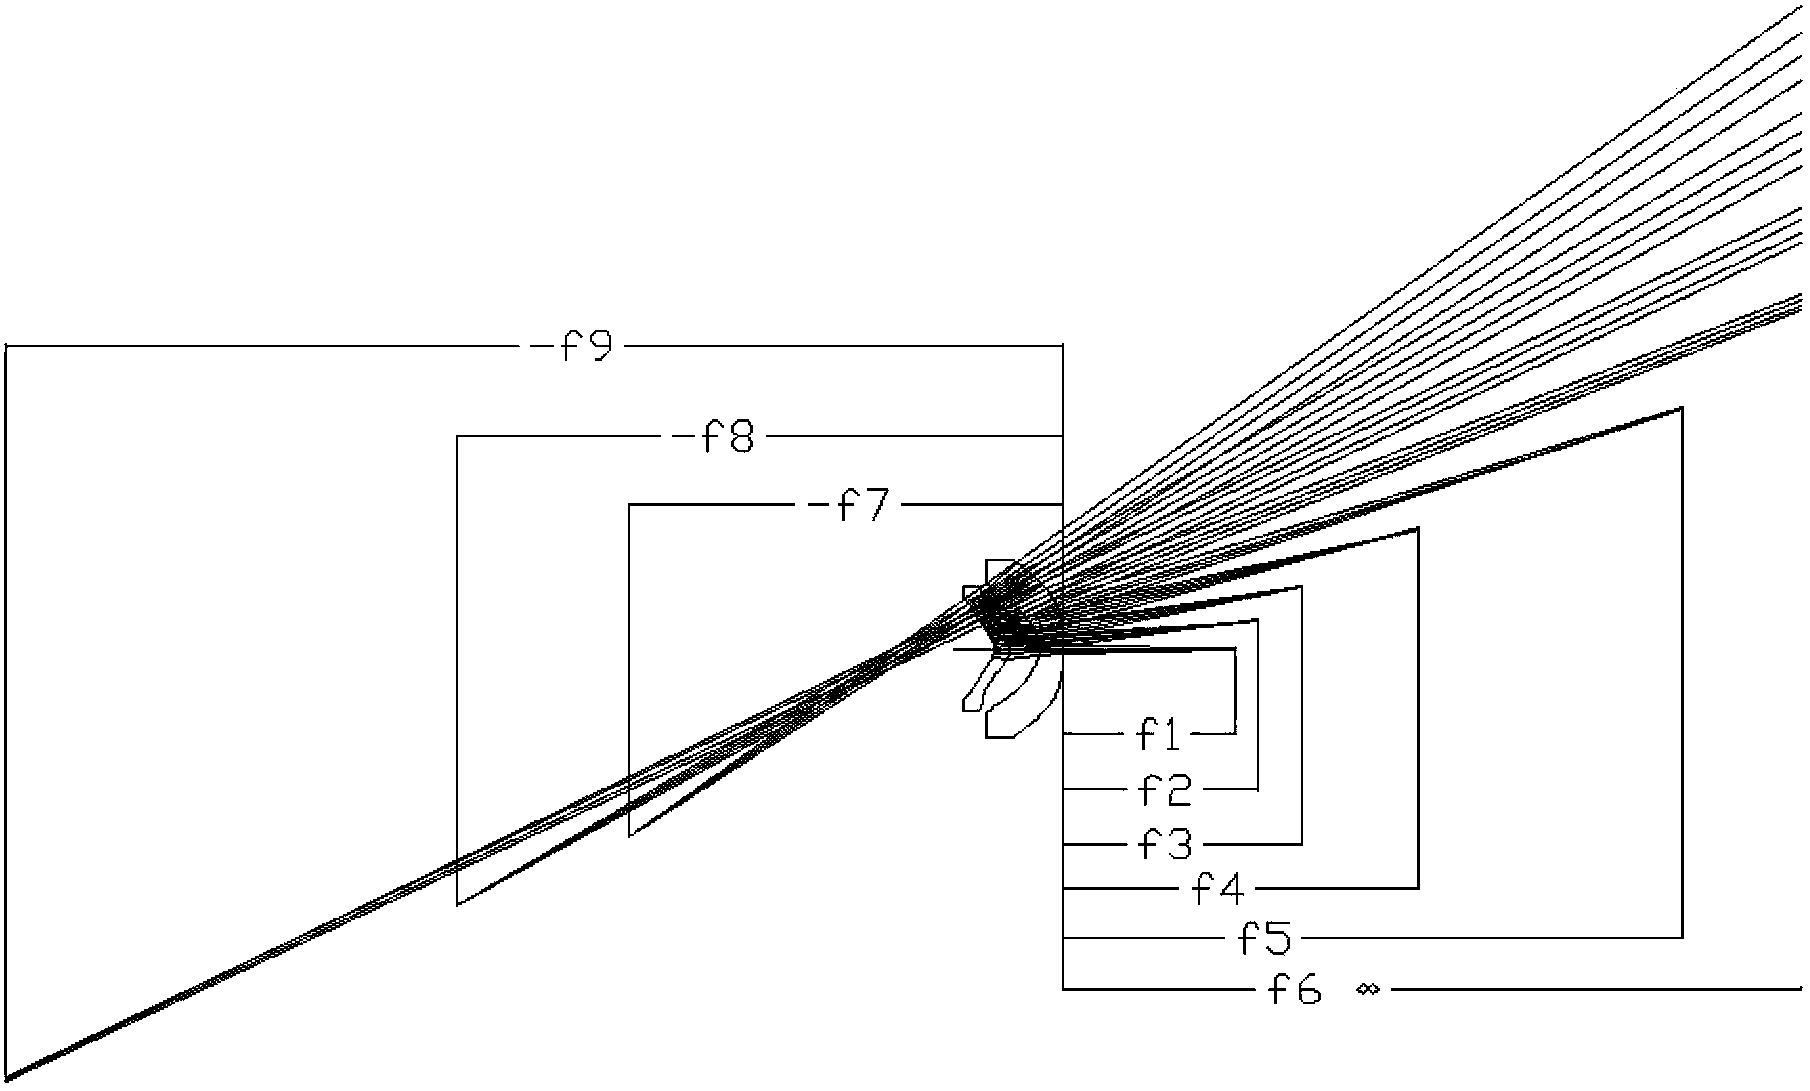 Ultra-short-focal projection objective lens